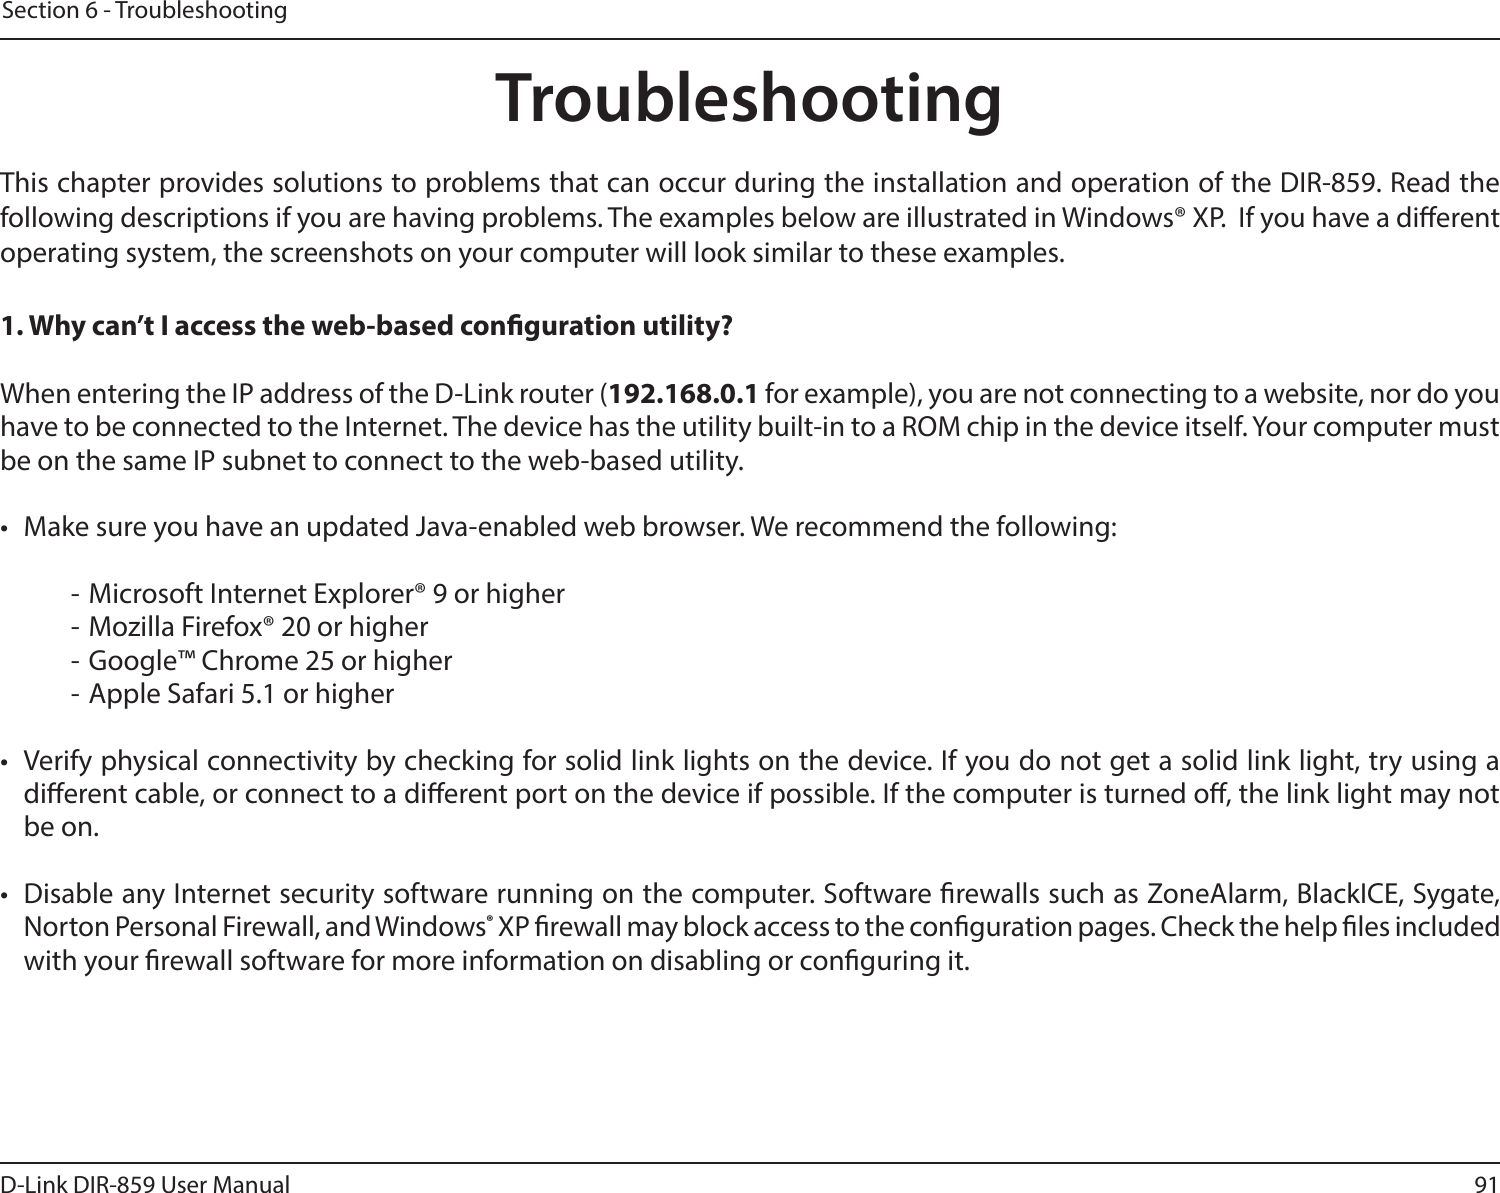 91D-Link DIR-859 User ManualSection 6 - TroubleshootingTroubleshootingThis chapter provides solutions to problems that can occur during the installation and operation of the DIR-859. Read the following descriptions if you are having problems. The examples below are illustrated in Windows® XP.  If you have a dierent operating system, the screenshots on your computer will look similar to these examples.1. Why can’t I access the web-based conguration utility?When entering the IP address of the D-Link router (192.168.0.1 for example), you are not connecting to a website, nor do you have to be connected to the Internet. The device has the utility built-in to a ROM chip in the device itself. Your computer must be on the same IP subnet to connect to the web-based utility. •  Make sure you have an updated Java-enabled web browser. We recommend the following:  - Microsoft Internet Explorer® 9 or higher- Mozilla Firefox® 20 or higher- Google™ Chrome 25 or higher- Apple Safari 5.1 or higher•  Verify physical connectivity by checking for solid link lights on the device. If you do not get a solid link light, try using a dierent cable, or connect to a dierent port on the device if possible. If the computer is turned o, the link light may not be on.•  Disable any Internet security software running on the computer. Software rewalls such as ZoneAlarm, BlackICE, Sygate, Norton Personal Firewall, and Windows® XP rewall may block access to the conguration pages. Check the help les included with your rewall software for more information on disabling or conguring it.